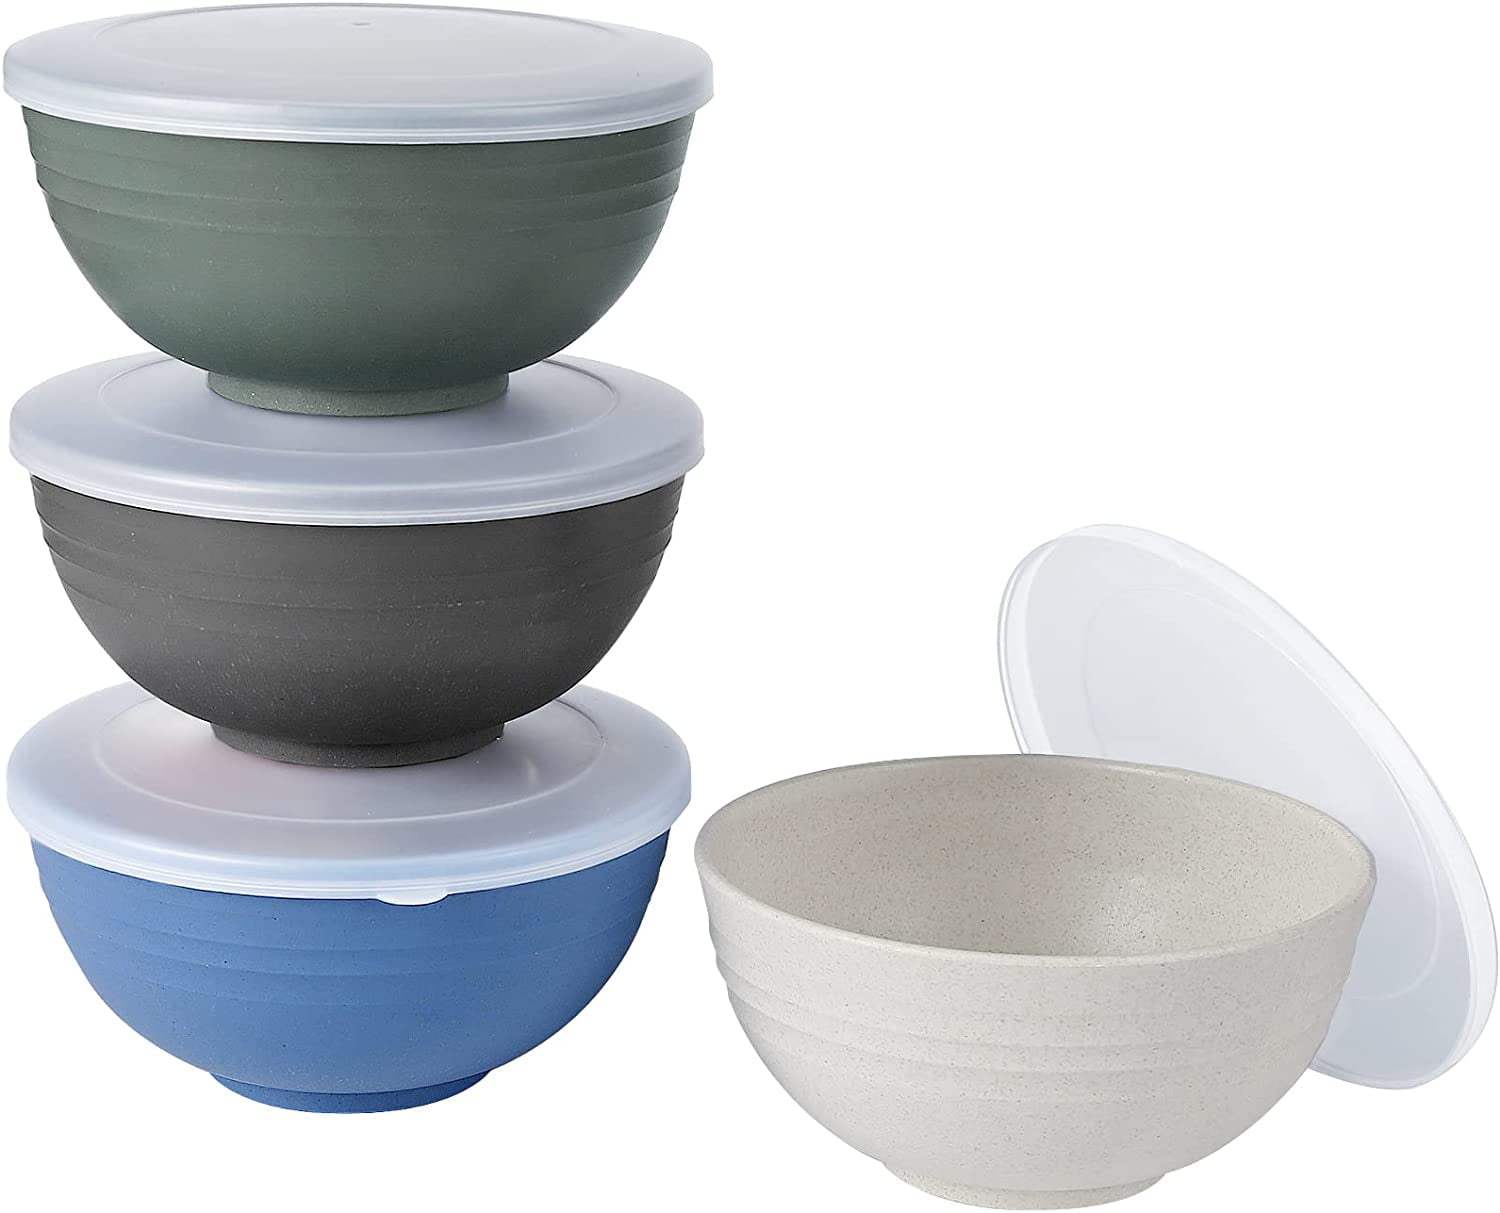 Loobuu Wheat Plastic Cereal Bowls with Lid, Resuable Bowls for